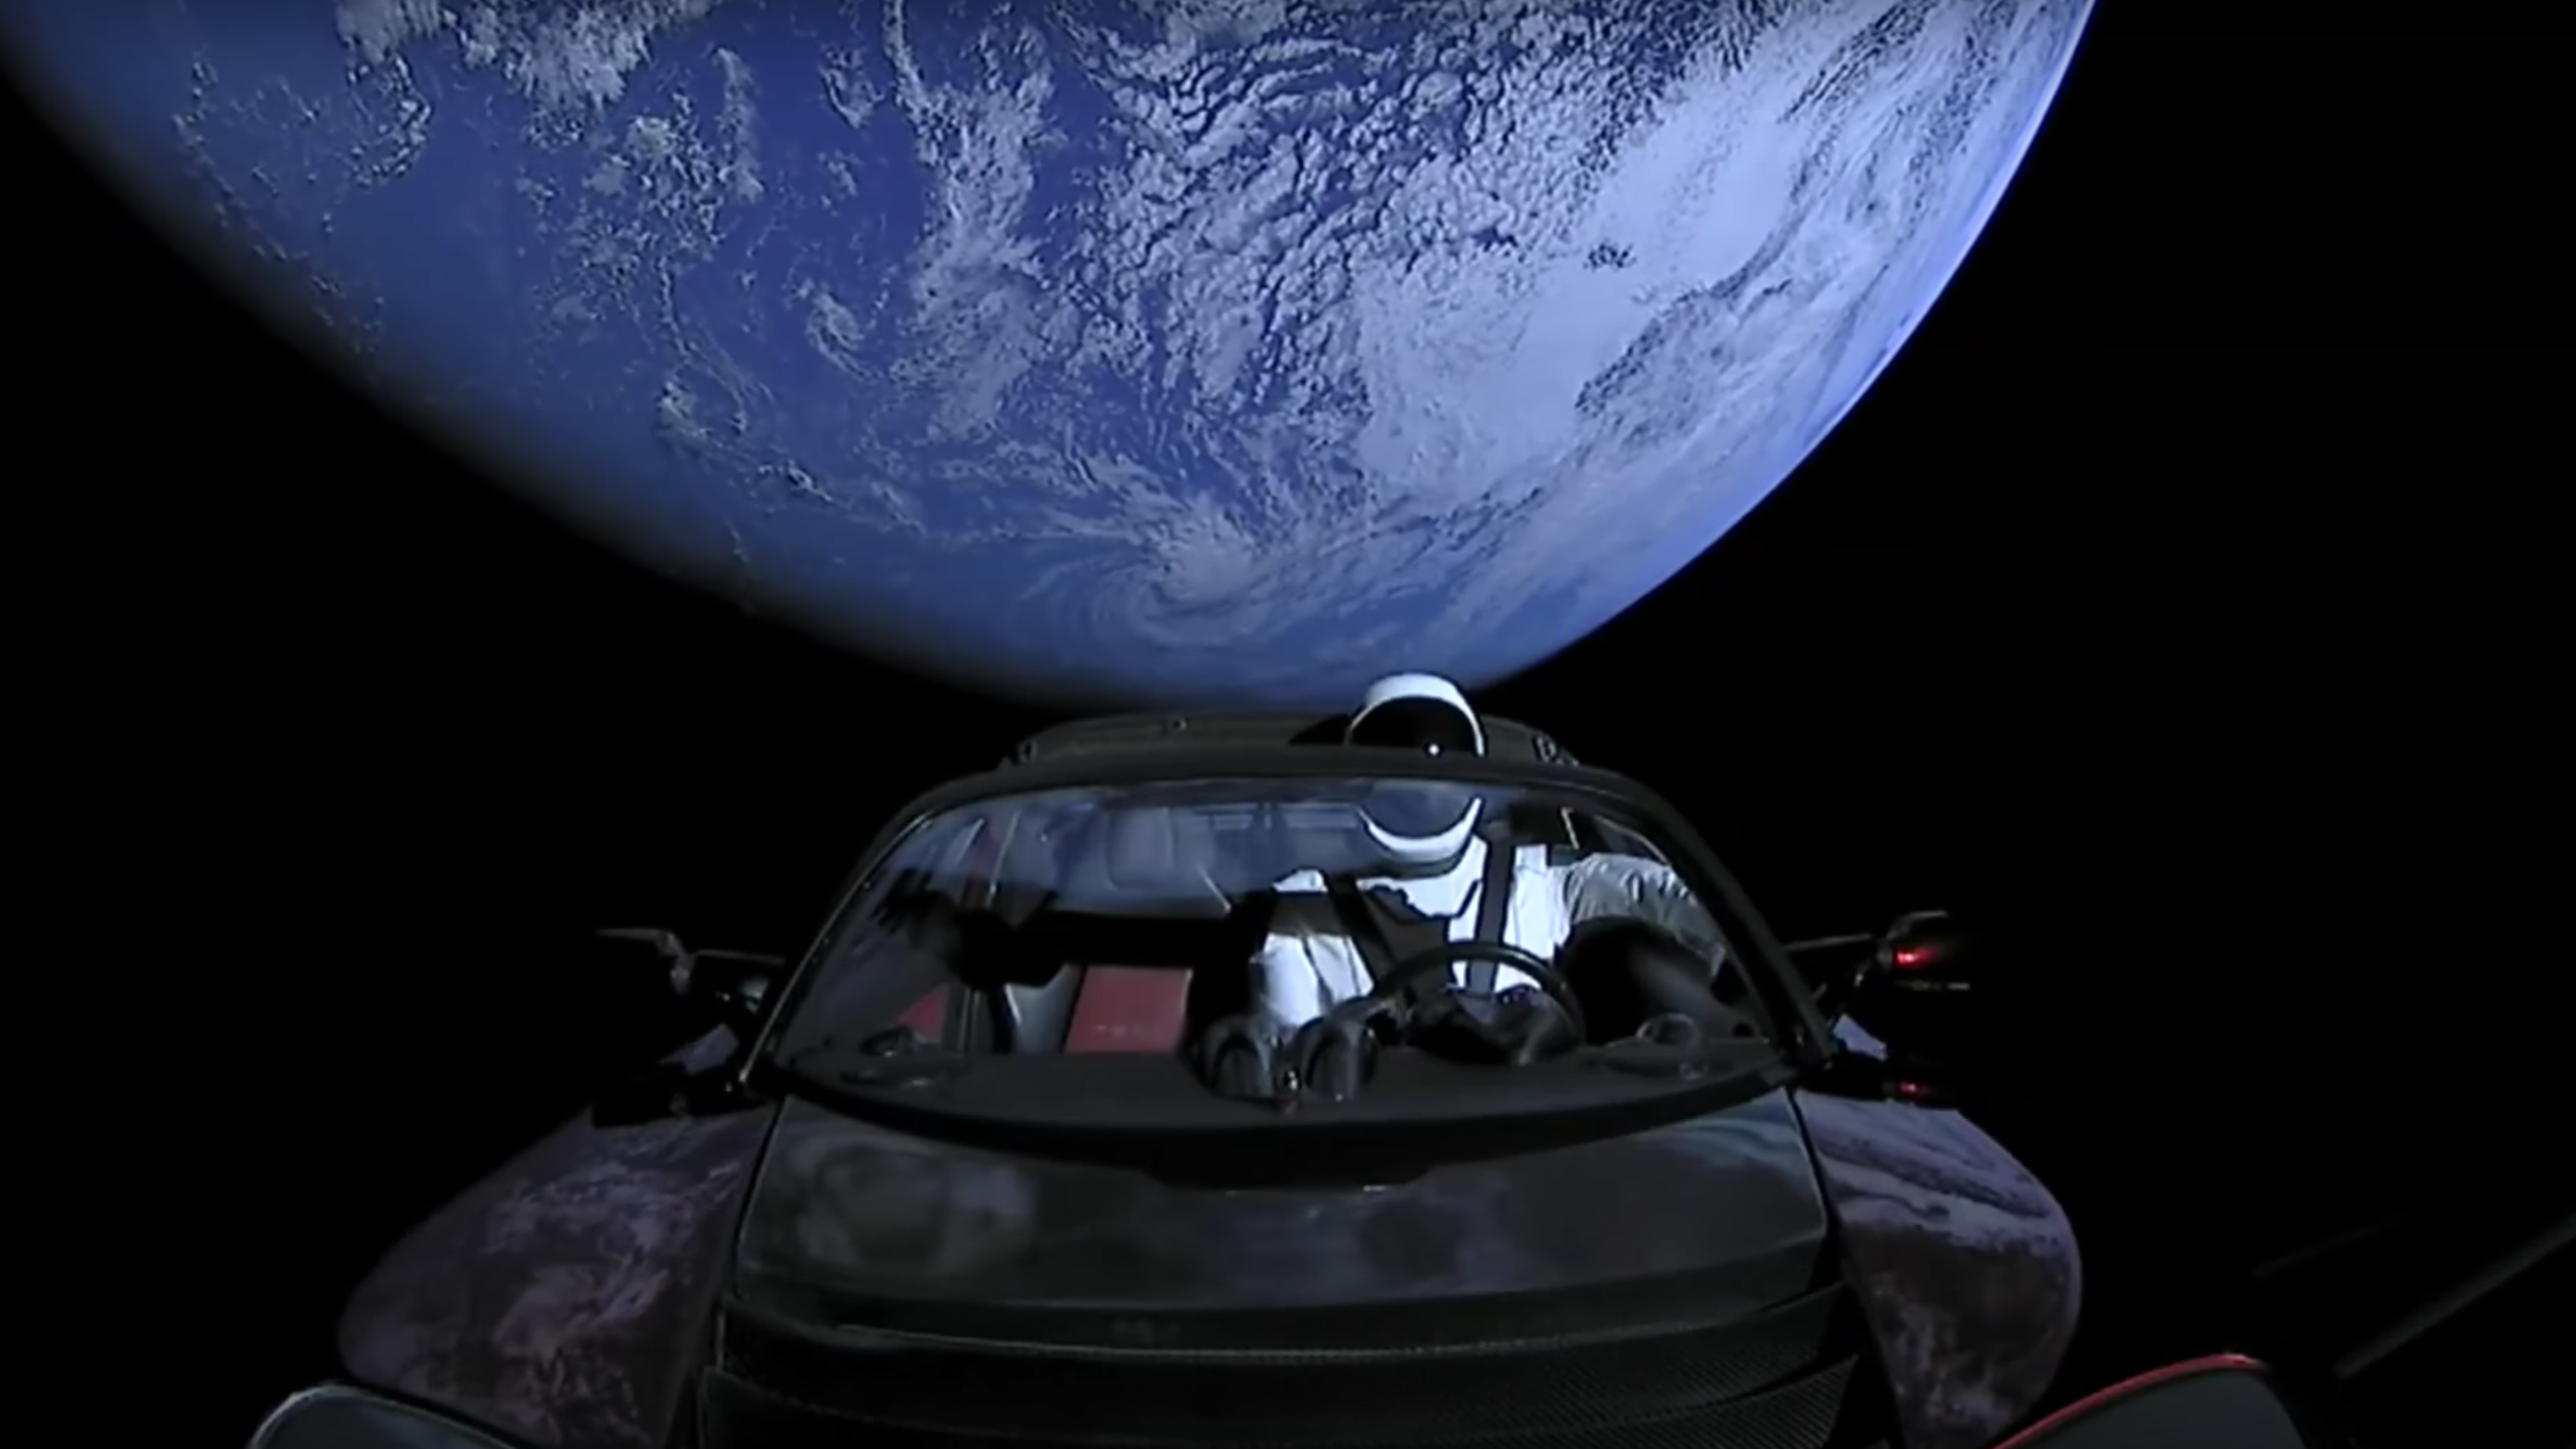 Bacteria Is Why The Space Tesla Could Really Mess Up A Planet (If It Ever Hits A Planet)